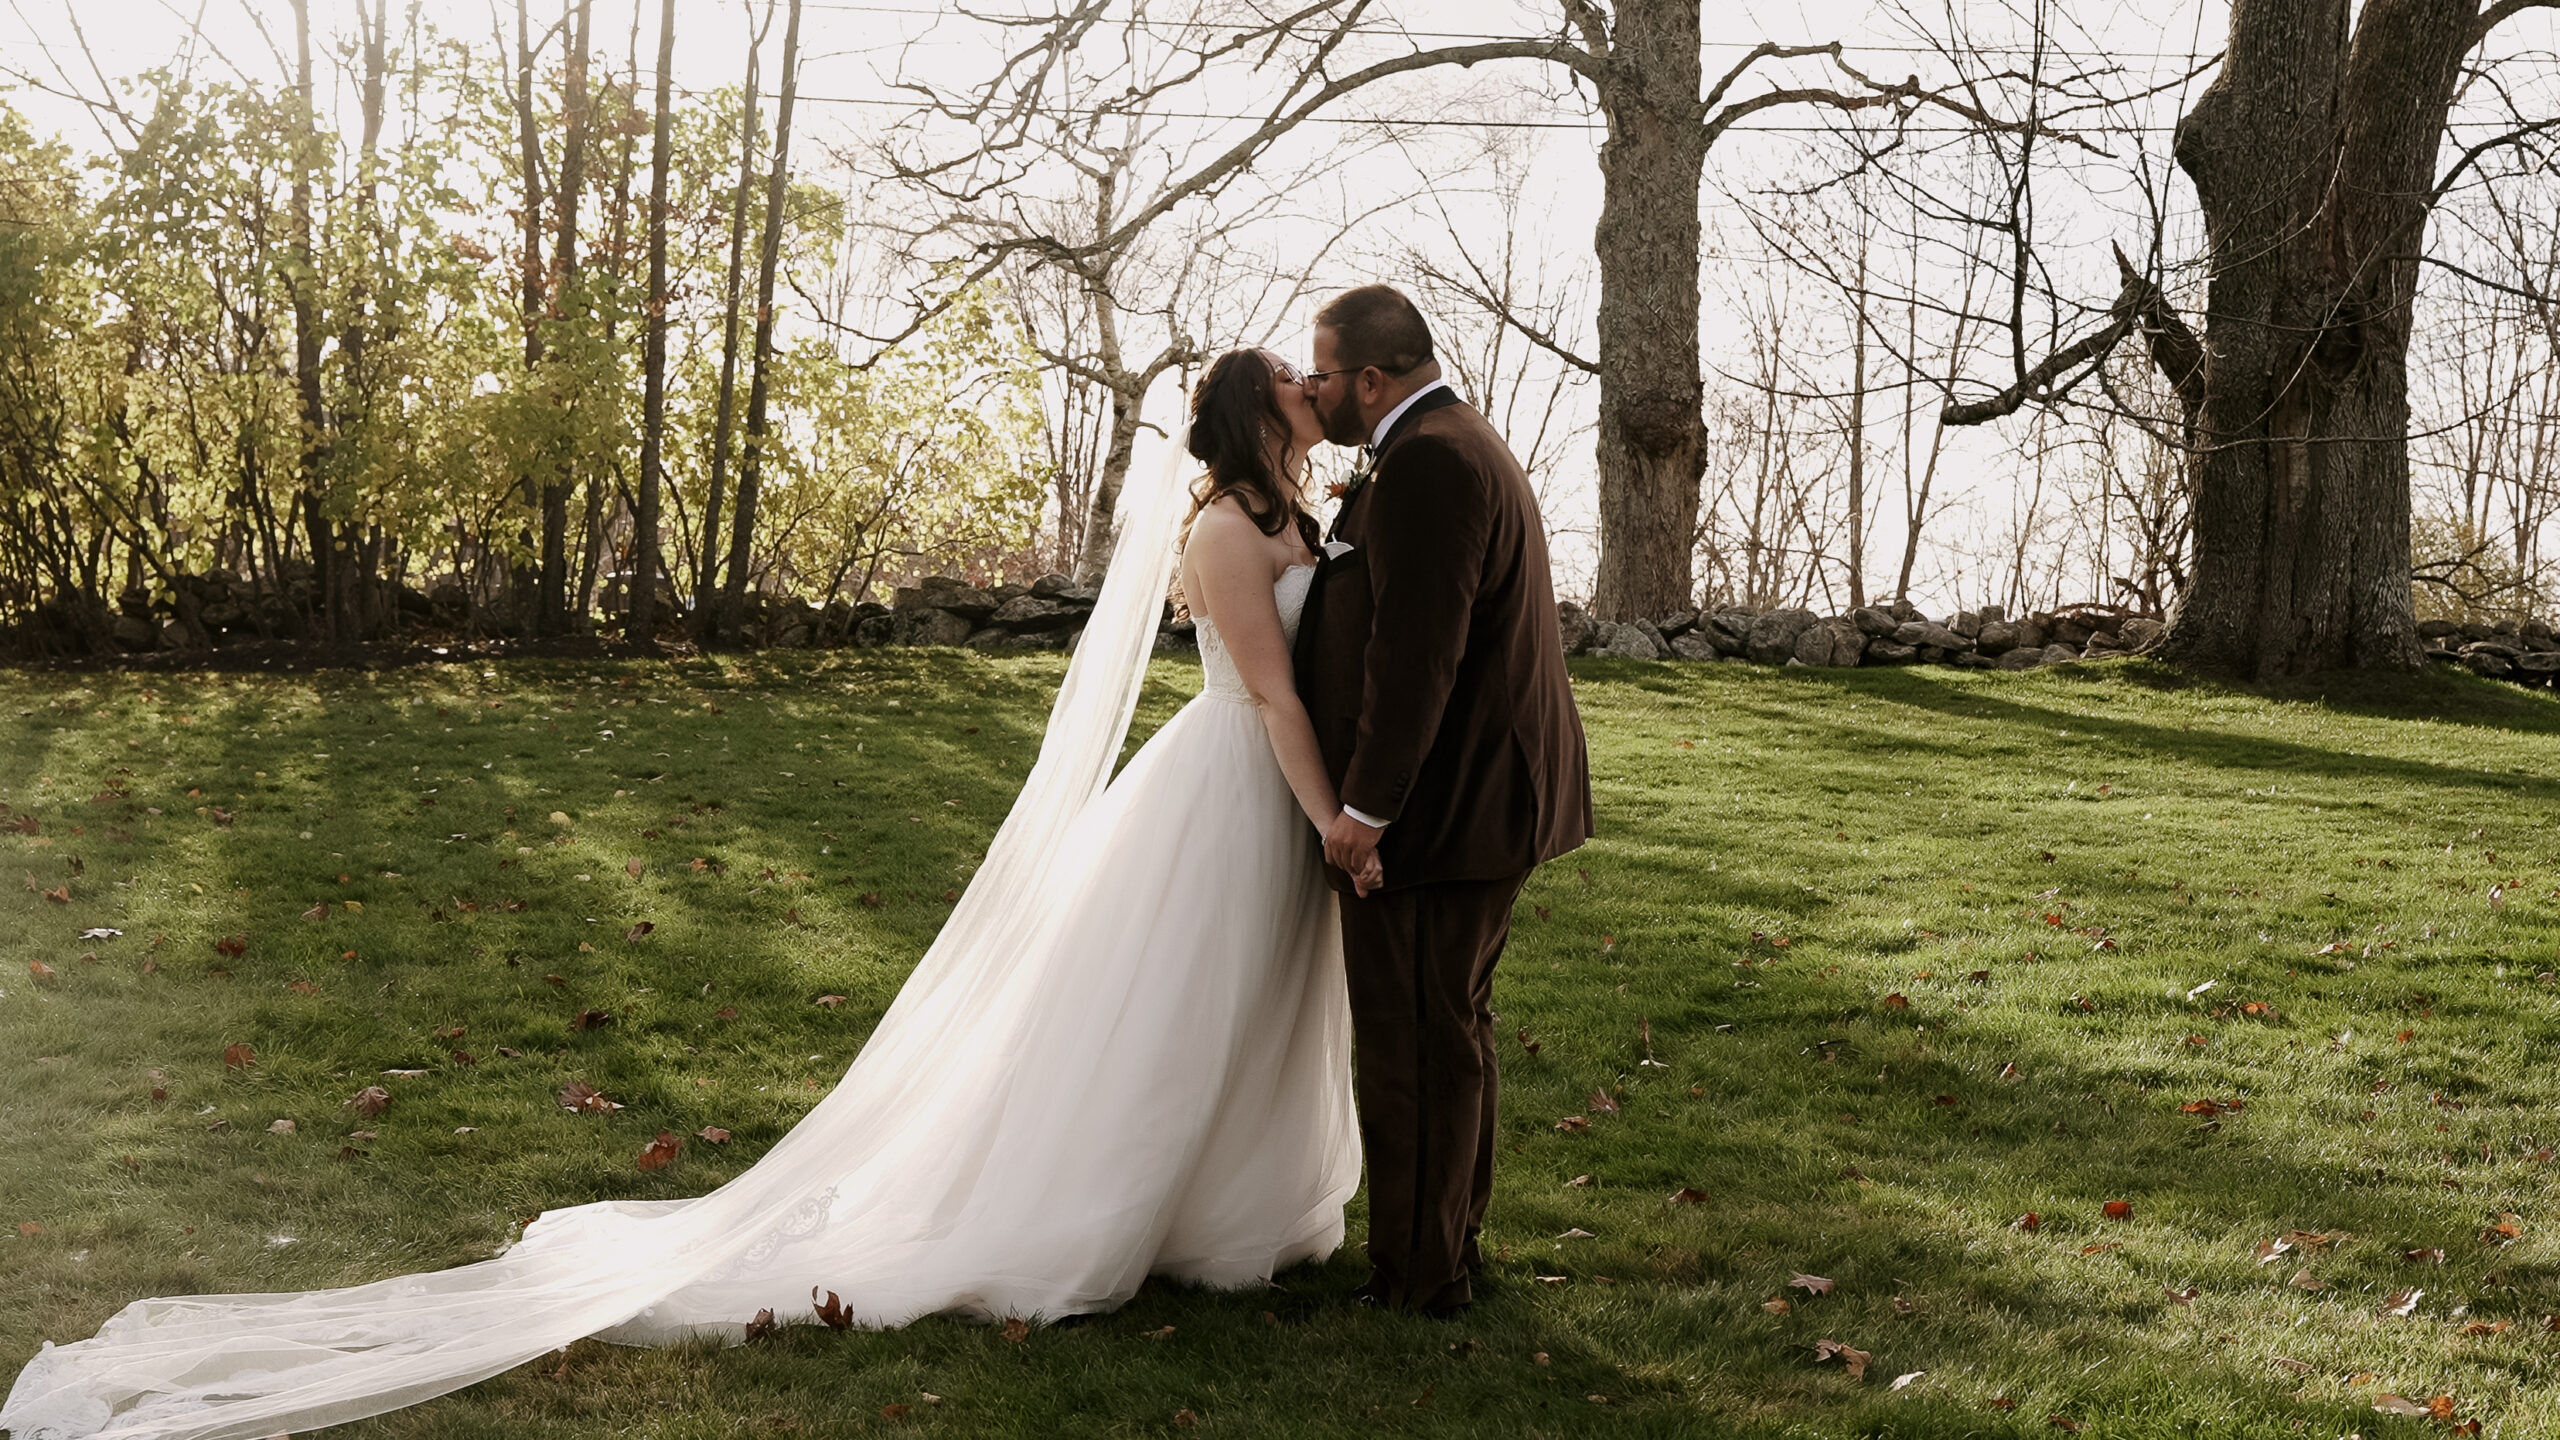 Couple standing in a field kissing. Bride is in a flowy white strapless dress and a long veil. Groom is wearing a brown velvet suit. You can see trees and their shadows and rockwall in the background.